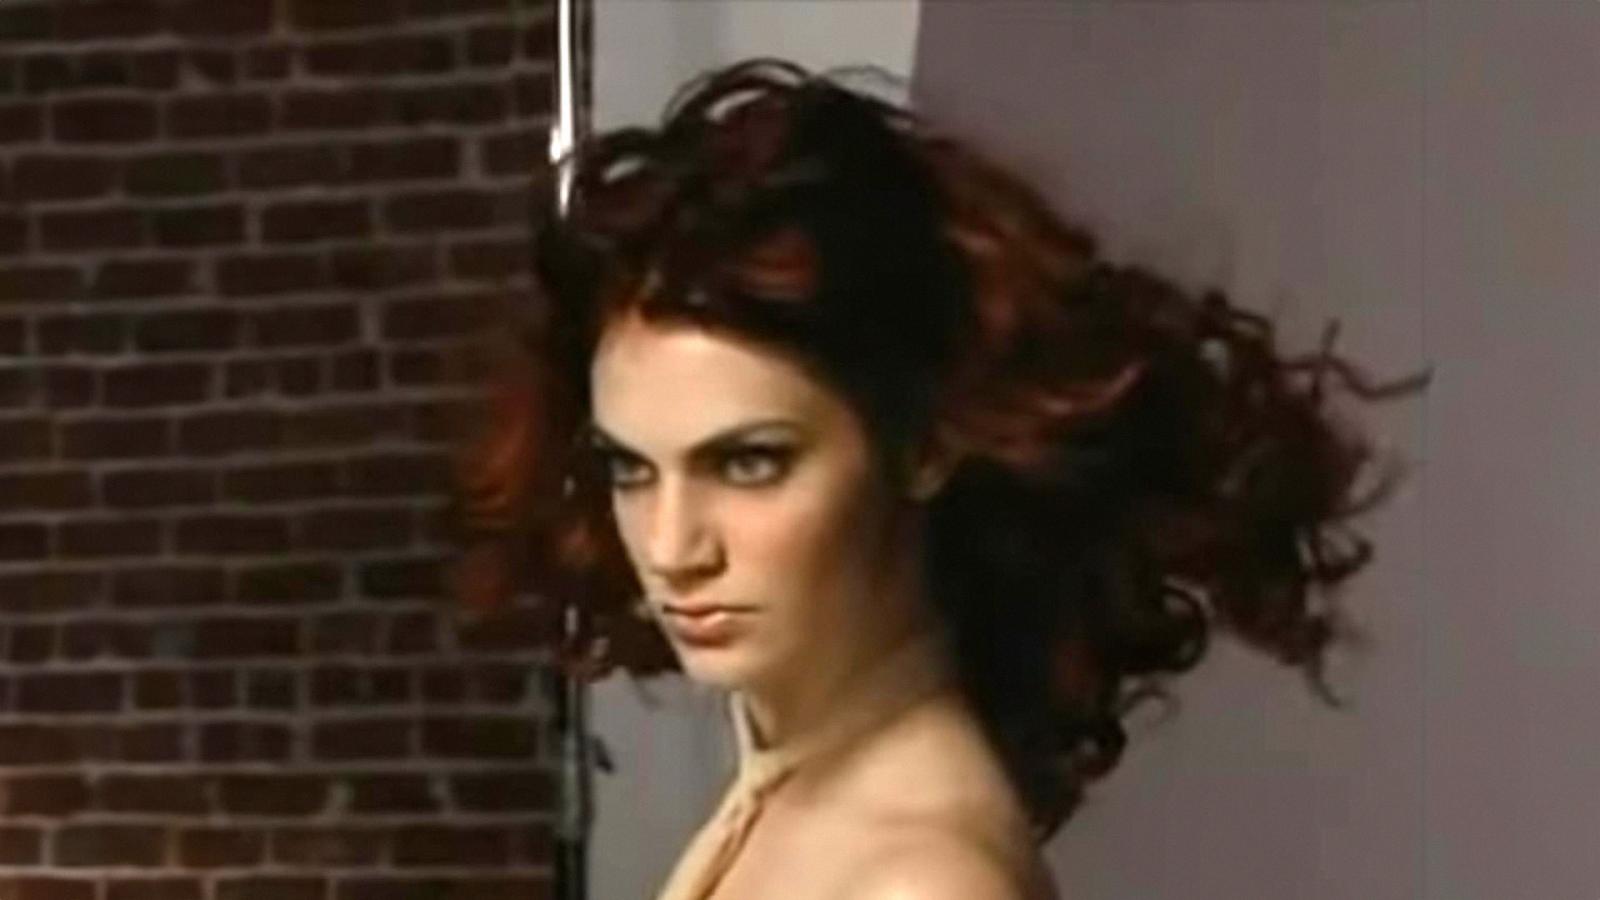 7 Worst America's Next Top Model Makeovers That Still Ignite Outrage - image 6